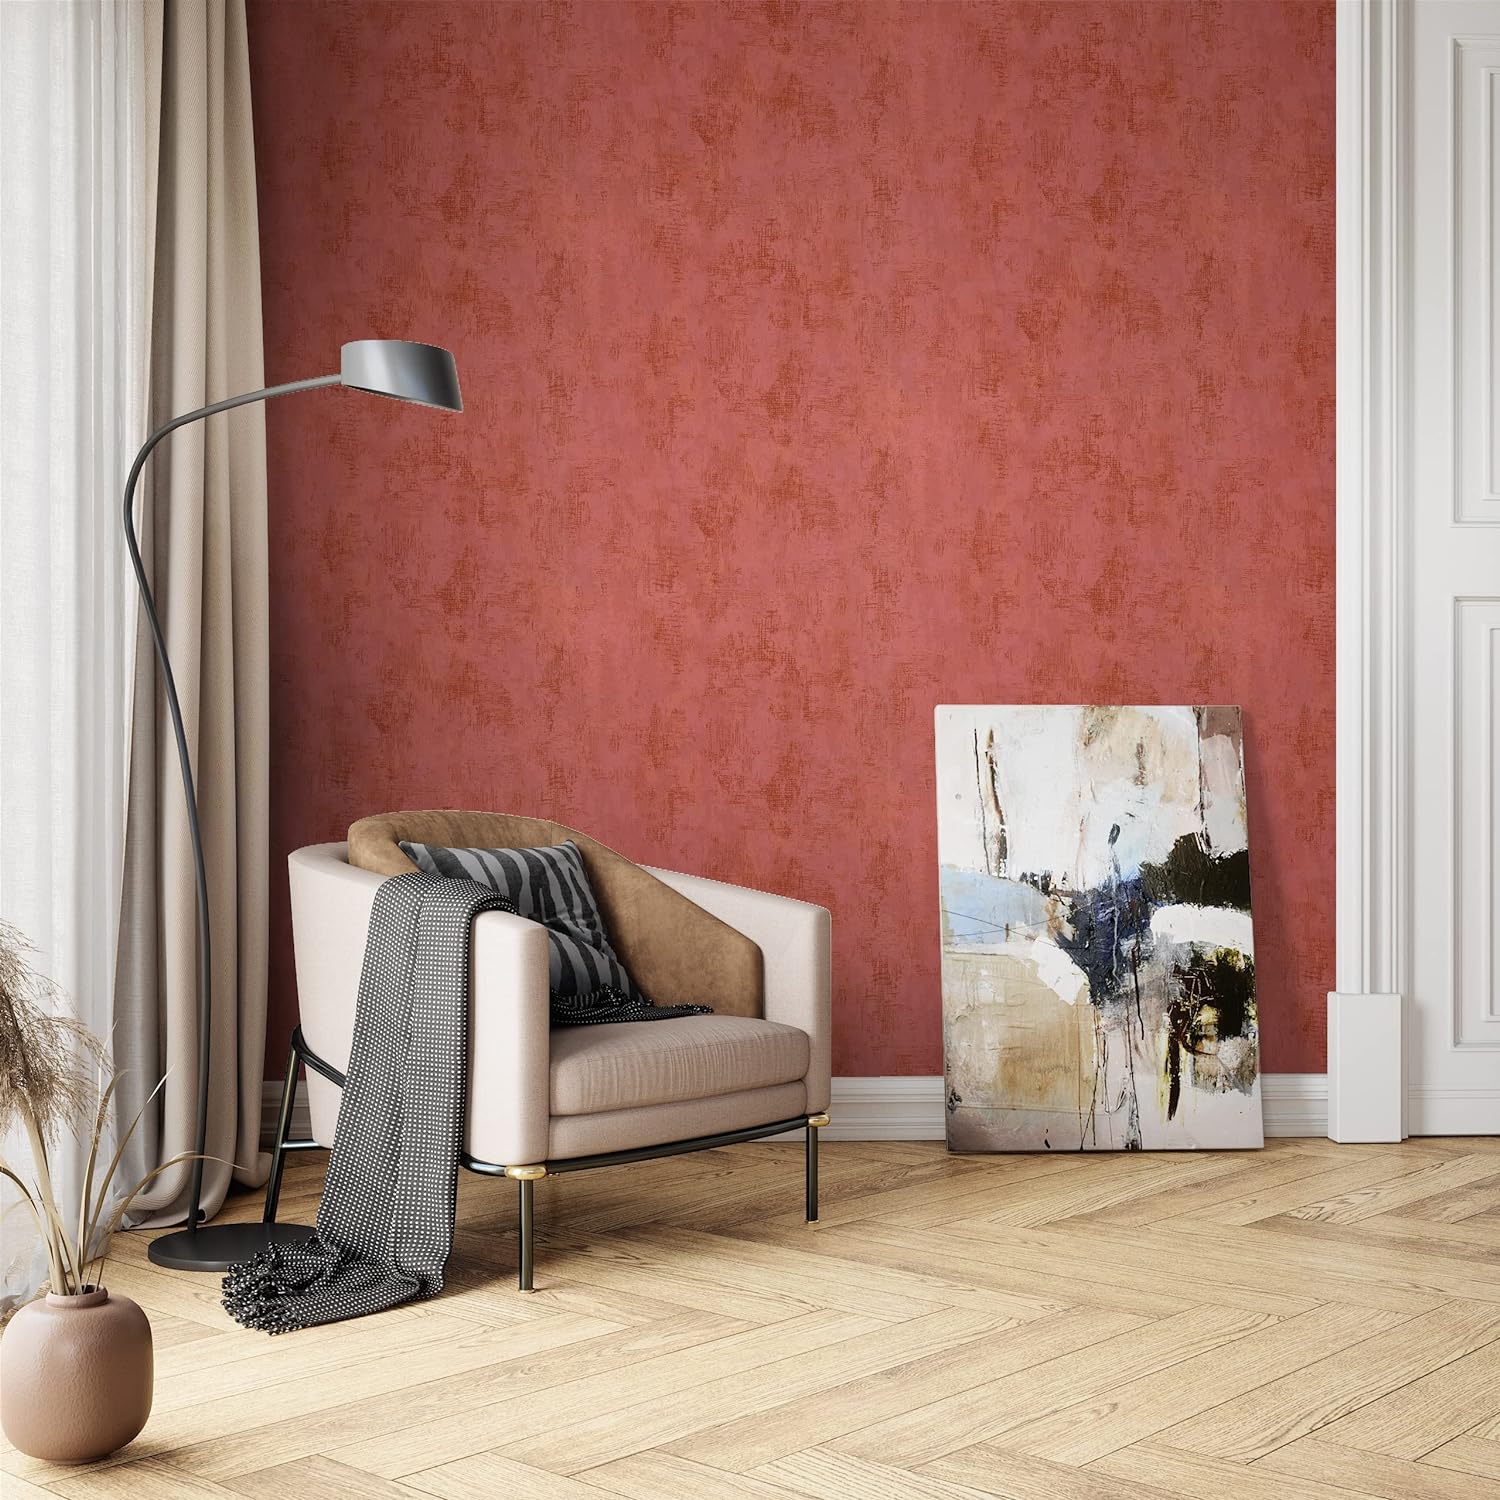 Newroom Wallpaper Graphic, Geometric Graphic Copper Non-Woven Wallpaper Modern Red with Wallpaper Guide ǀ Graphics